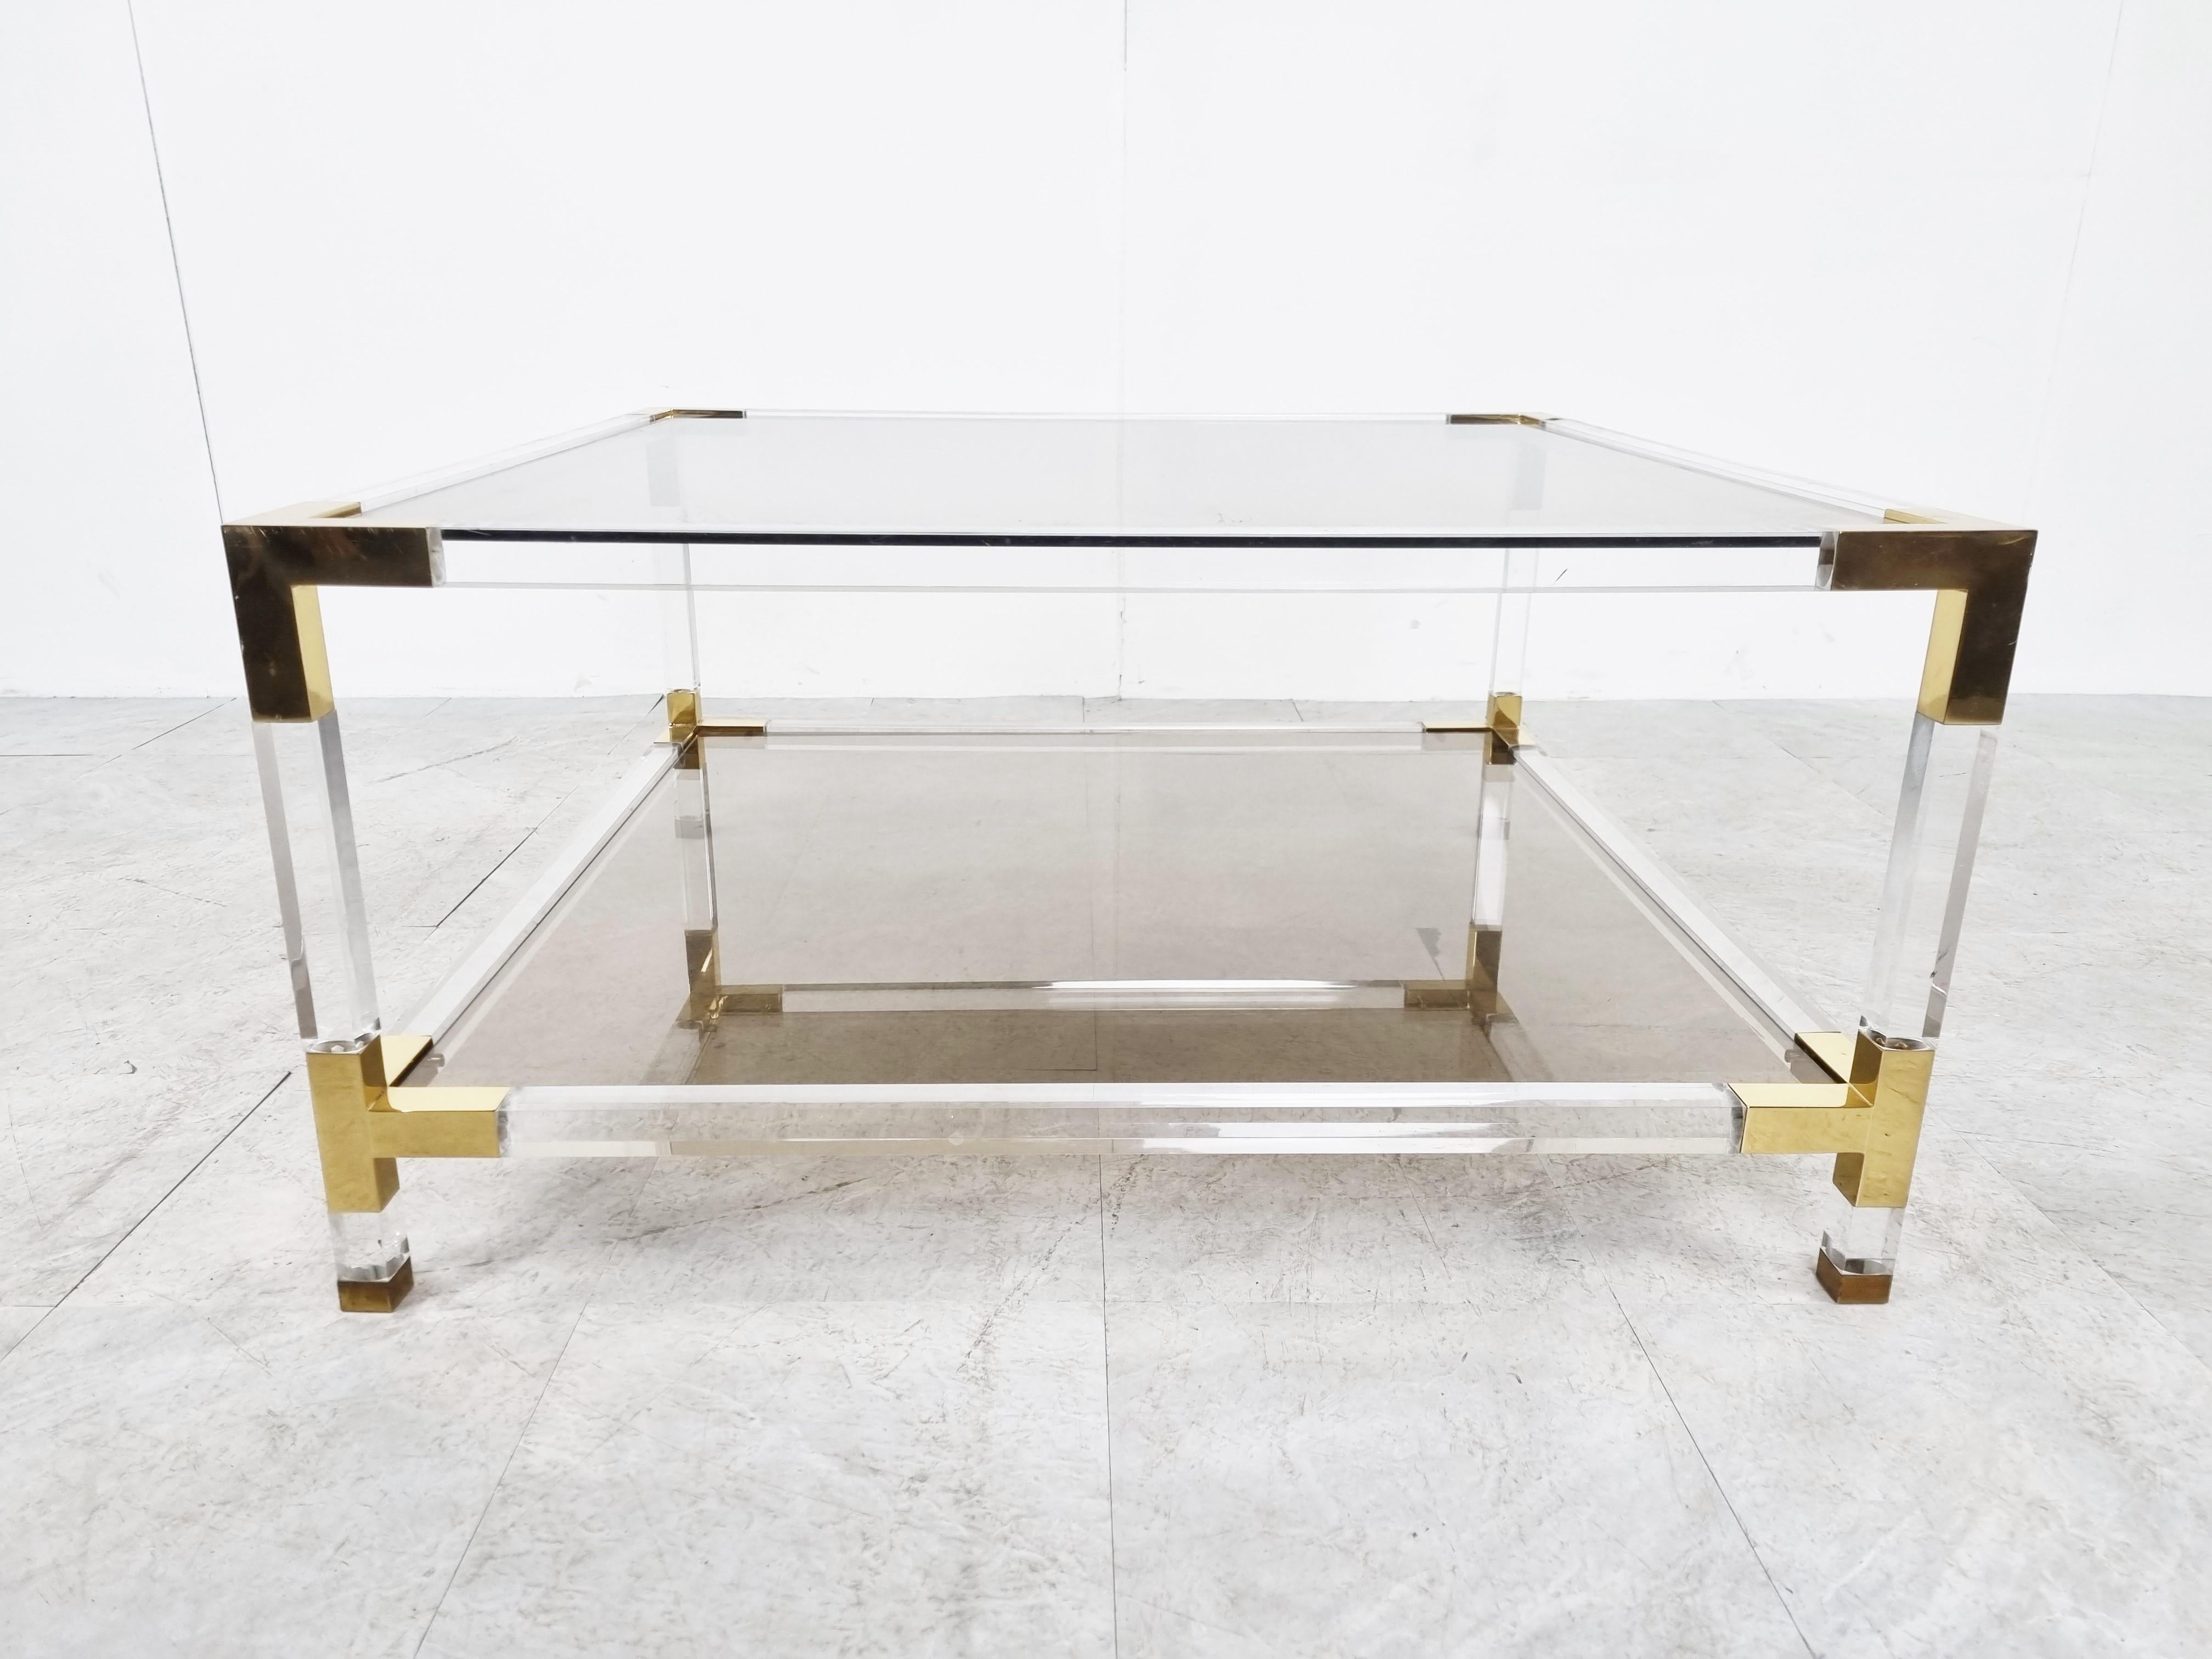 Small square coffee table with a lucite frame, brass corners and smoked glass plates.

Good condition.

Very modern looking and decorative table that can be combined with lots of interior styles.

Good condition.

1970s -